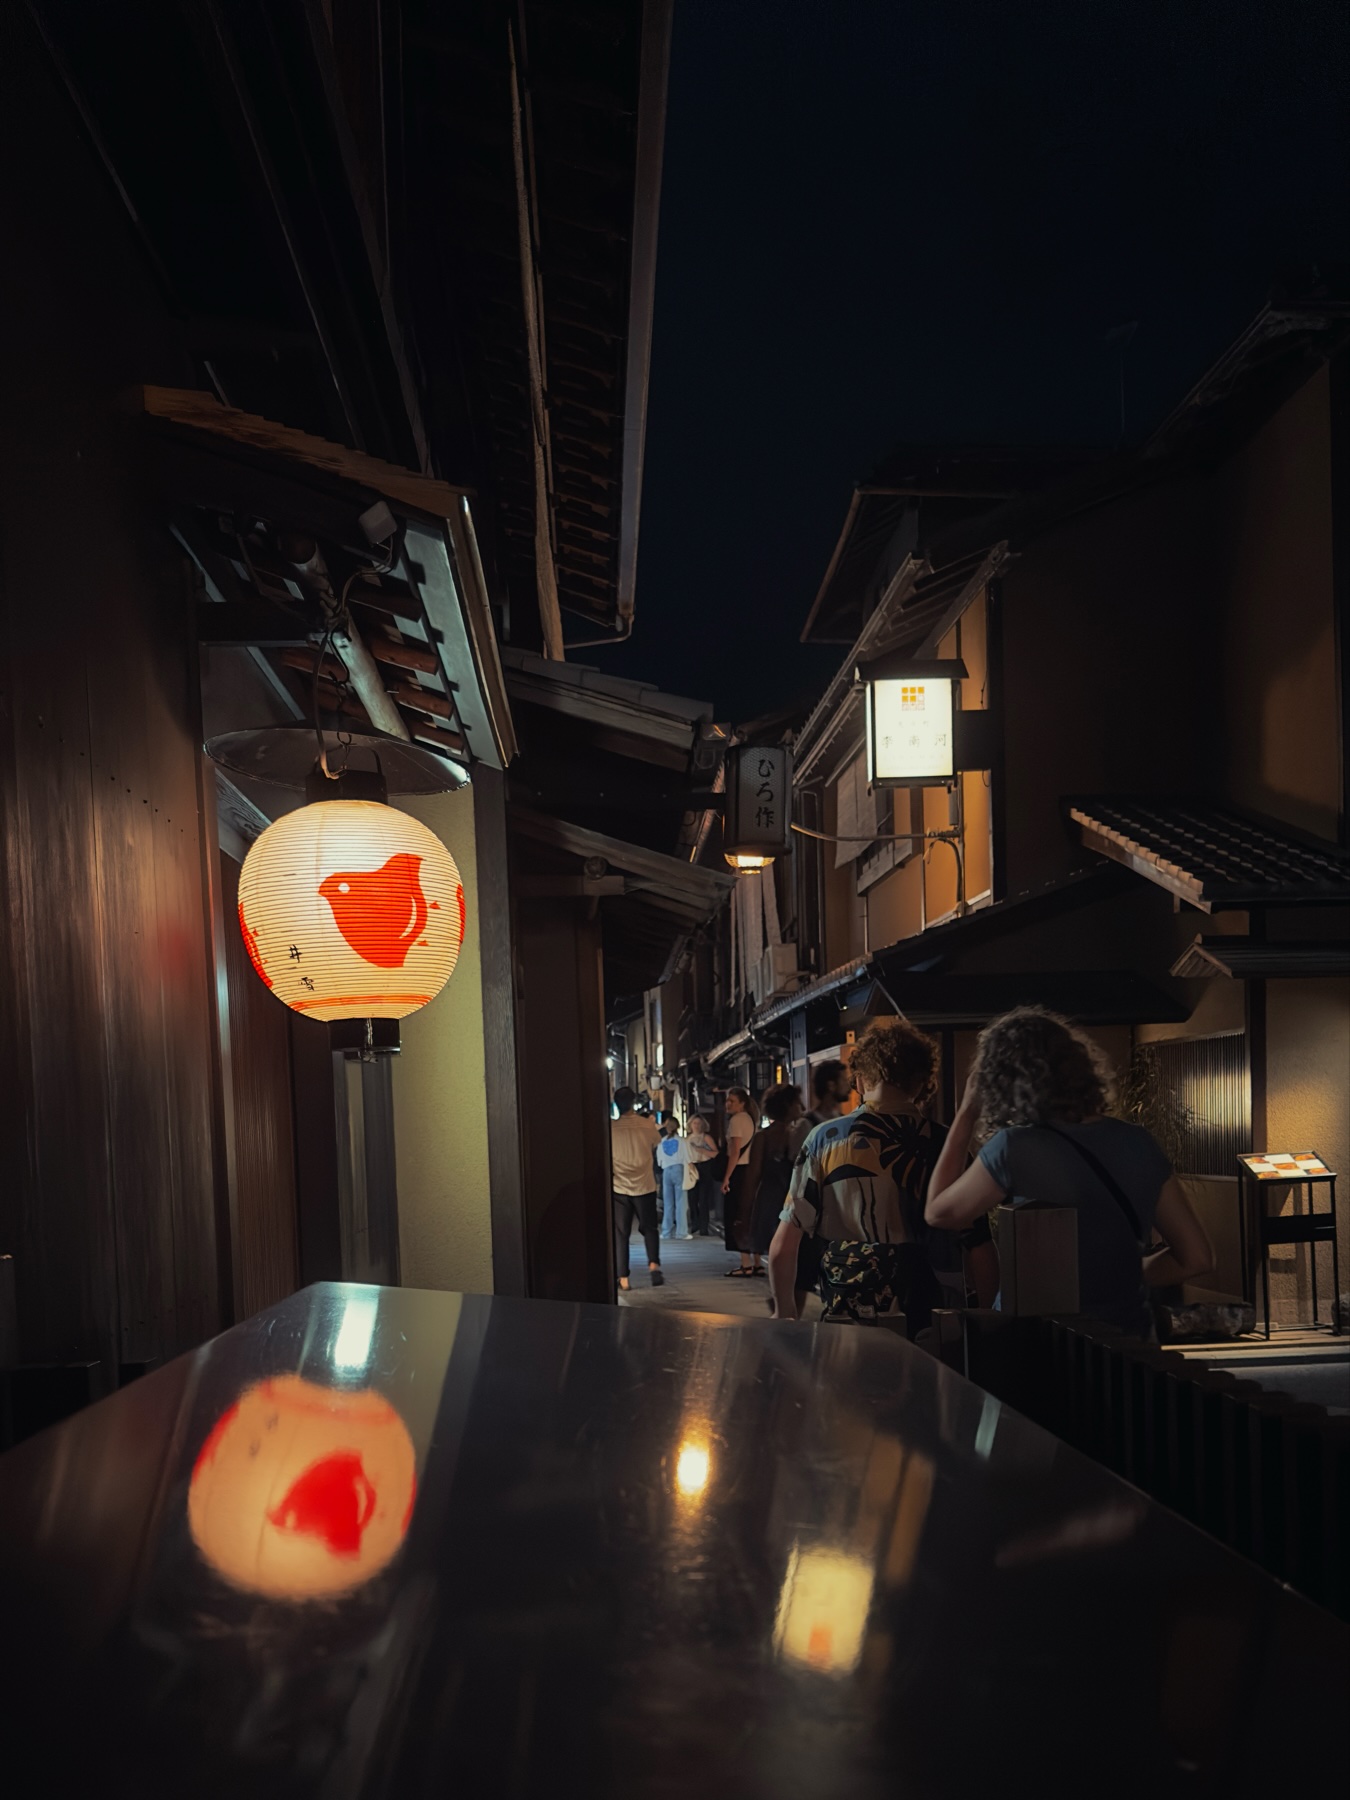 A lantern with the Chidori which is the red bird symbol of Pontocho area of Kyoto